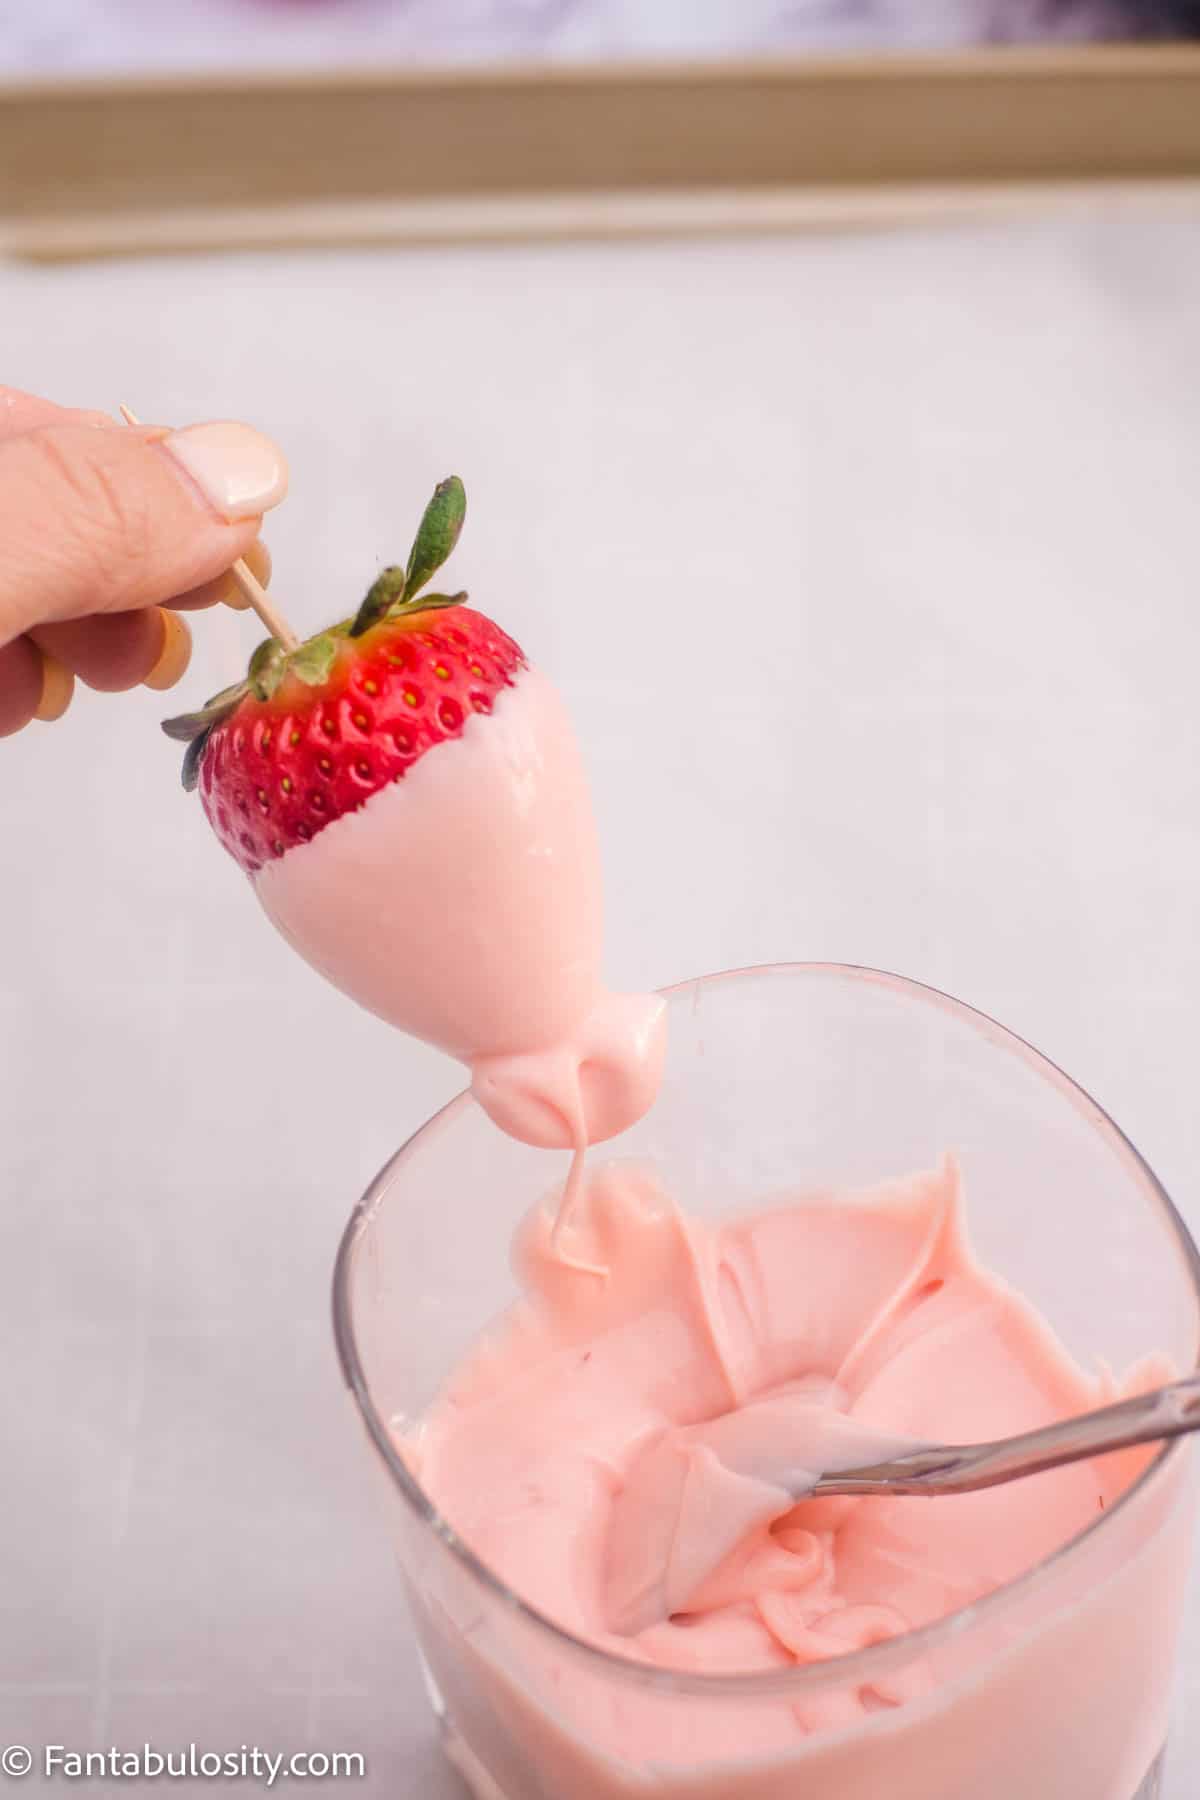 strawberry being gently pulled alongside of glass